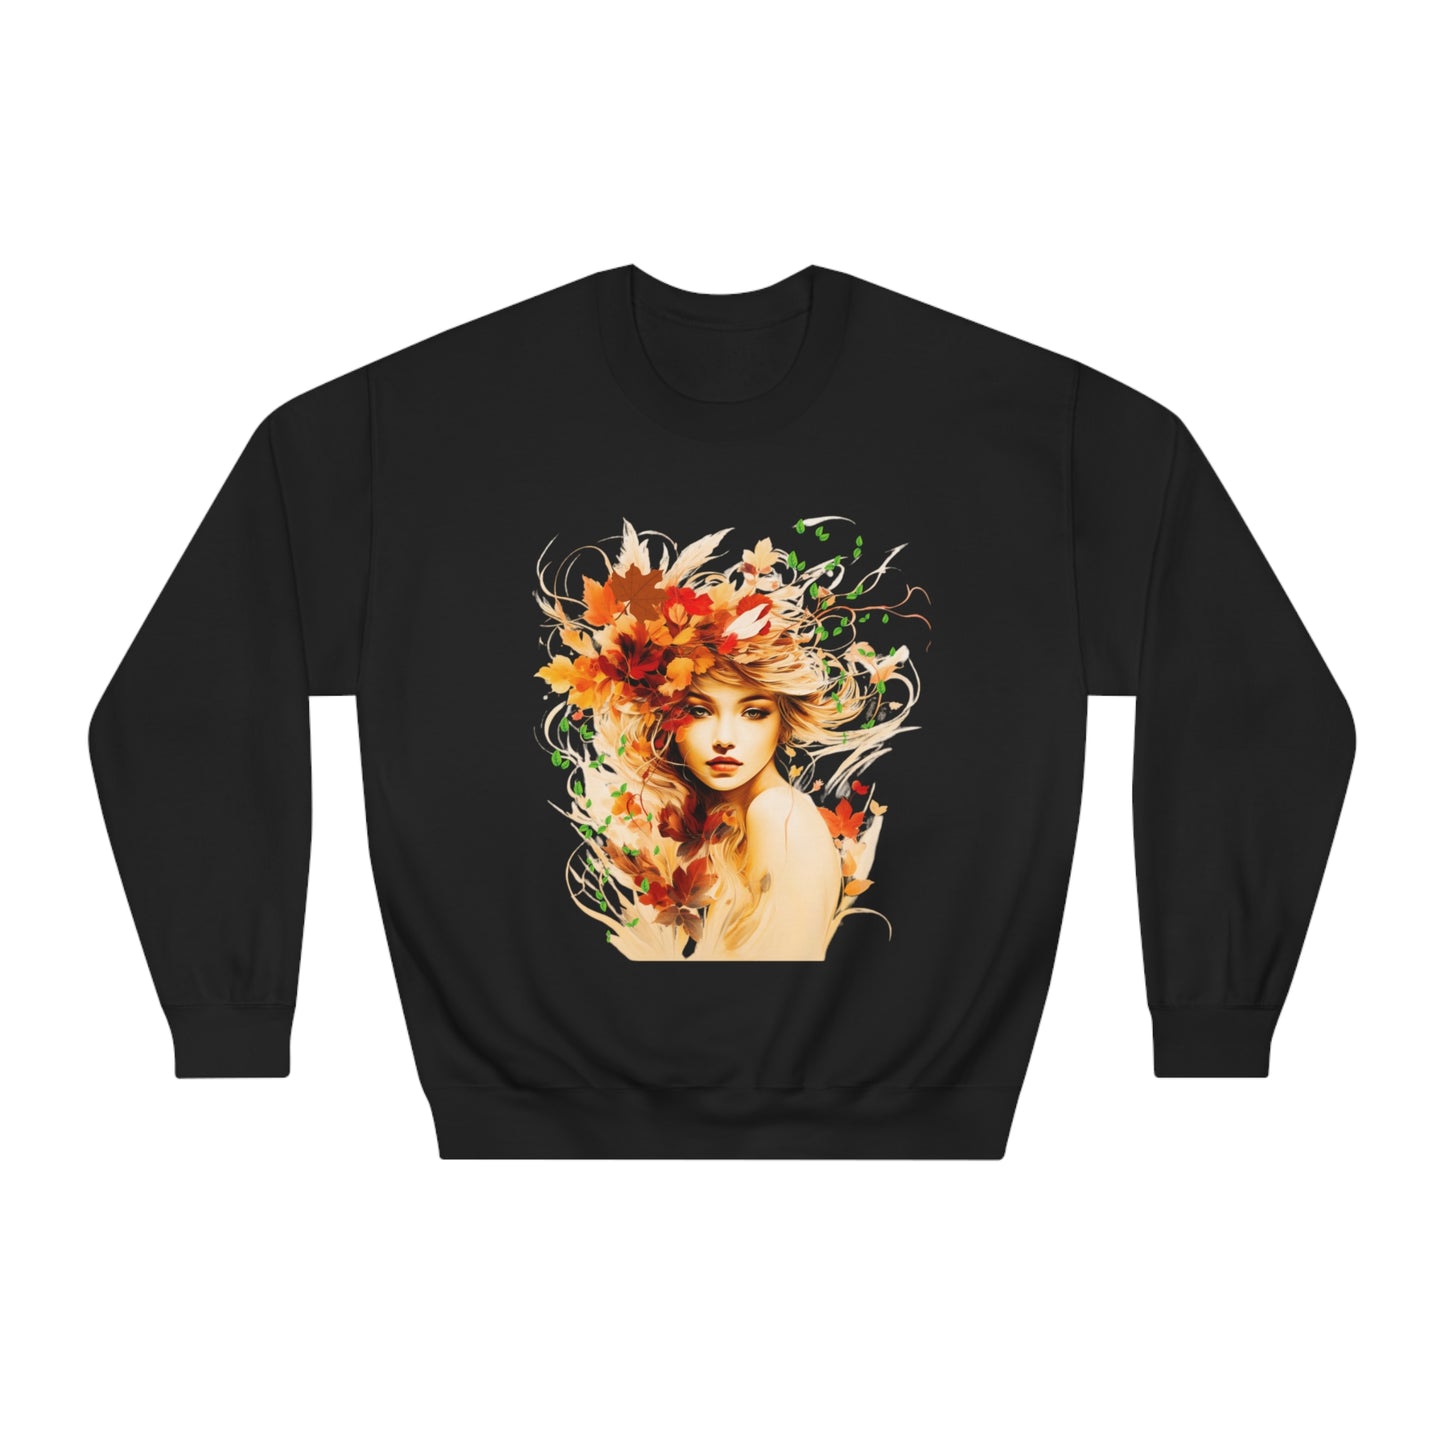 Whimsical Dreams in Autumn Hues: Romantic Dreamy Female Surrounded by Autumn Leaves Sweatshirt - Fairycore, Forestcore, Cottagecore-inspired Fashion Sweatshirt Black S 